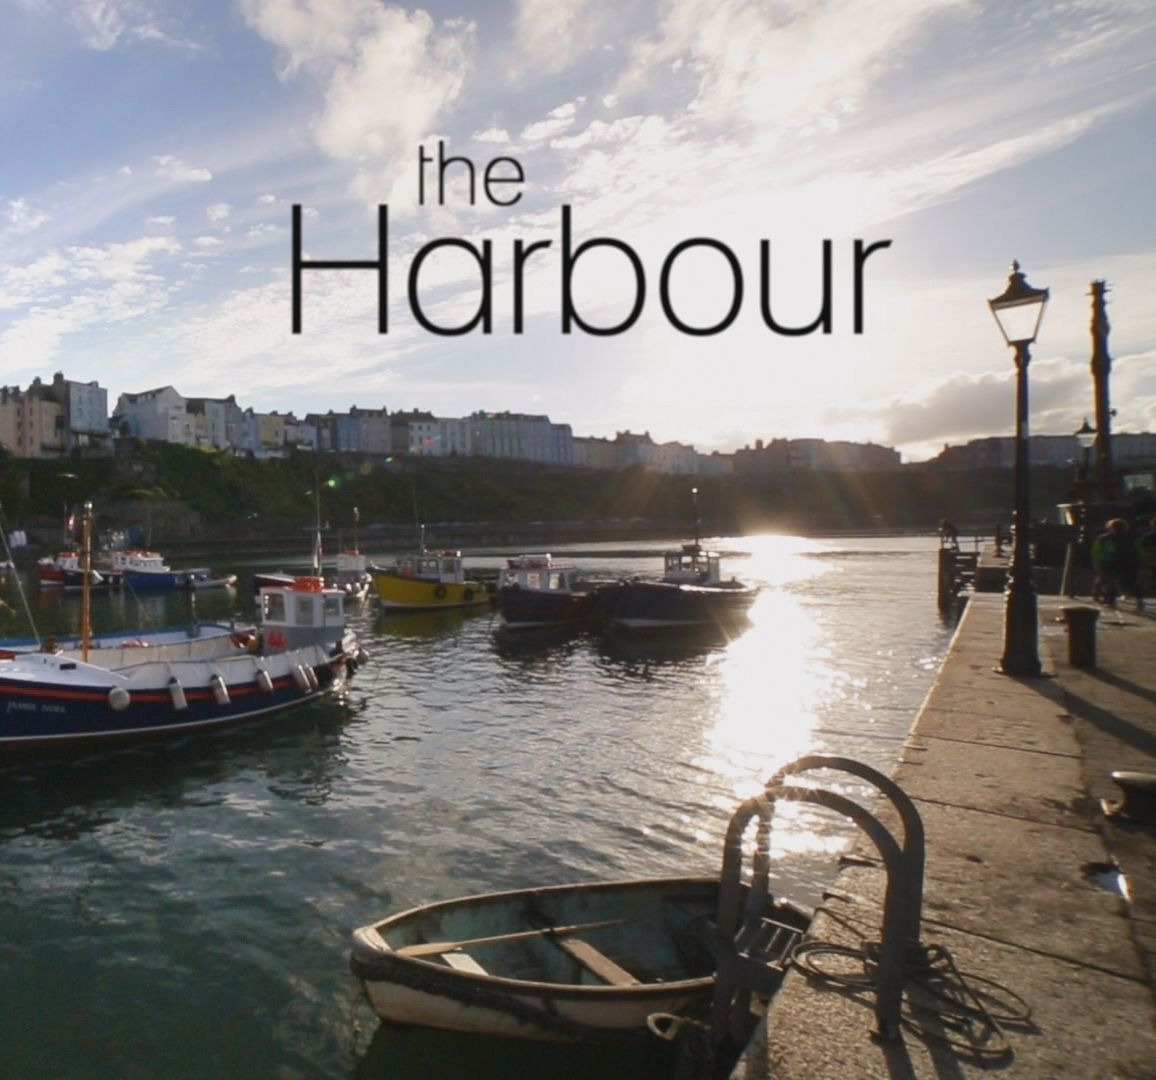 Show The Harbour